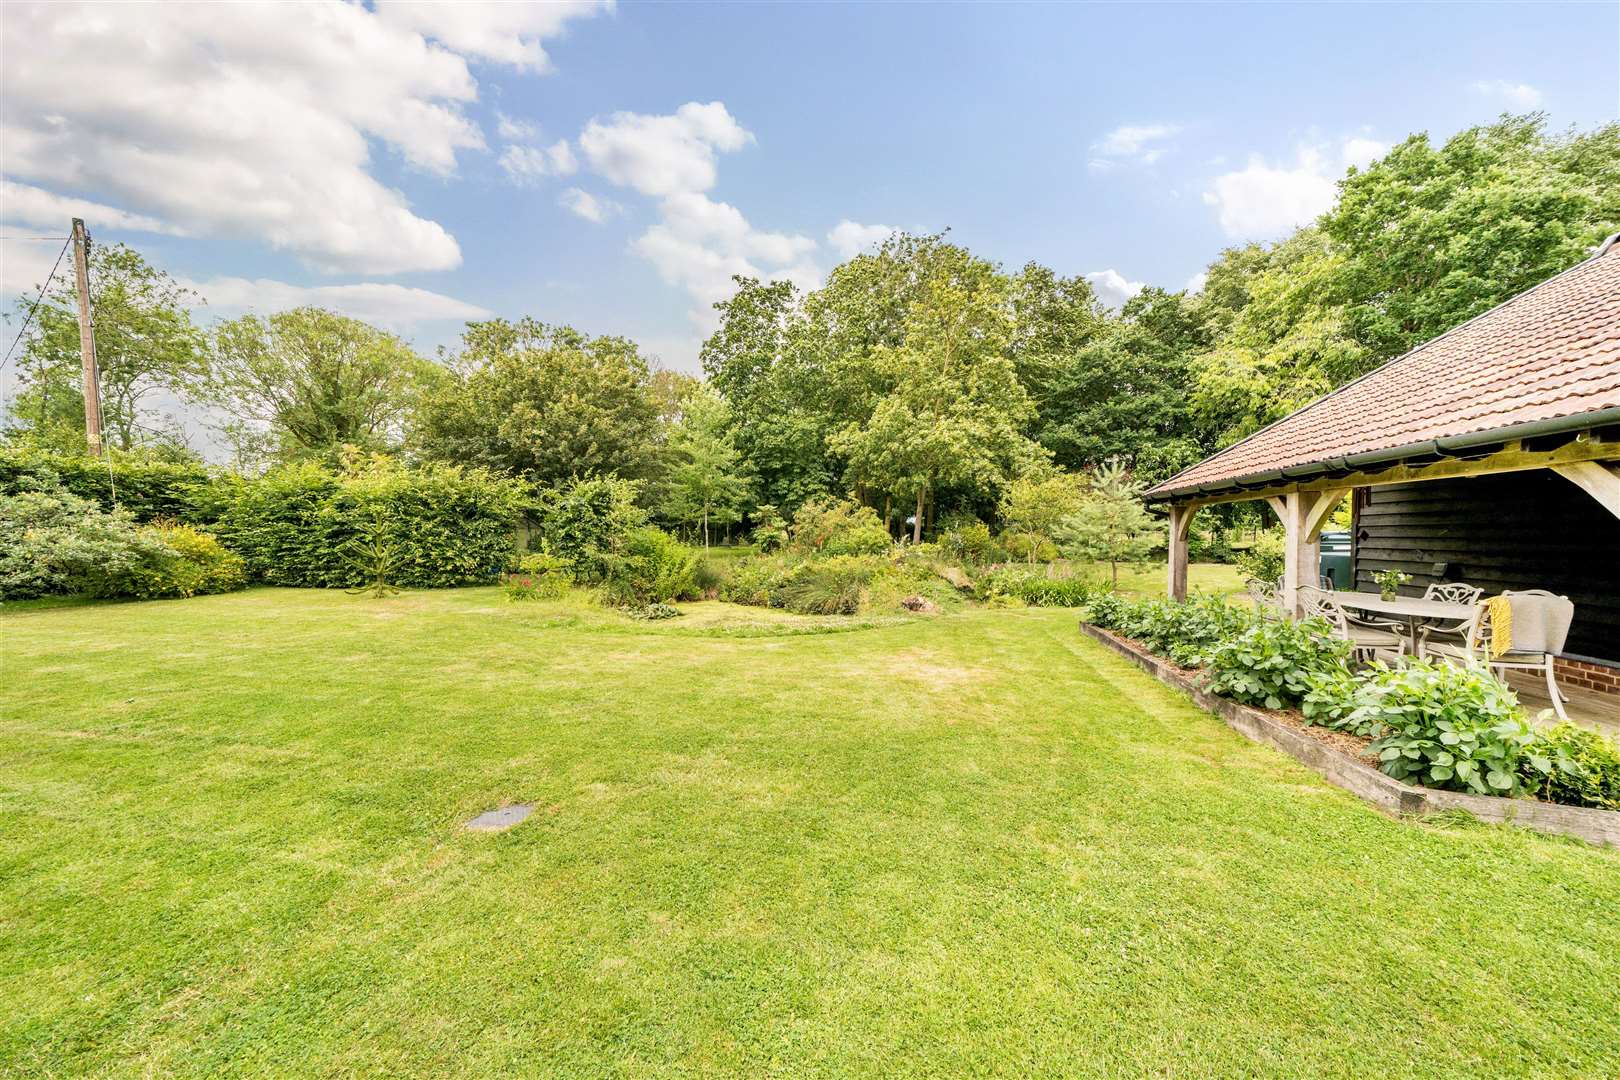 The home sits in its own impressive plot of about 2.75 acres